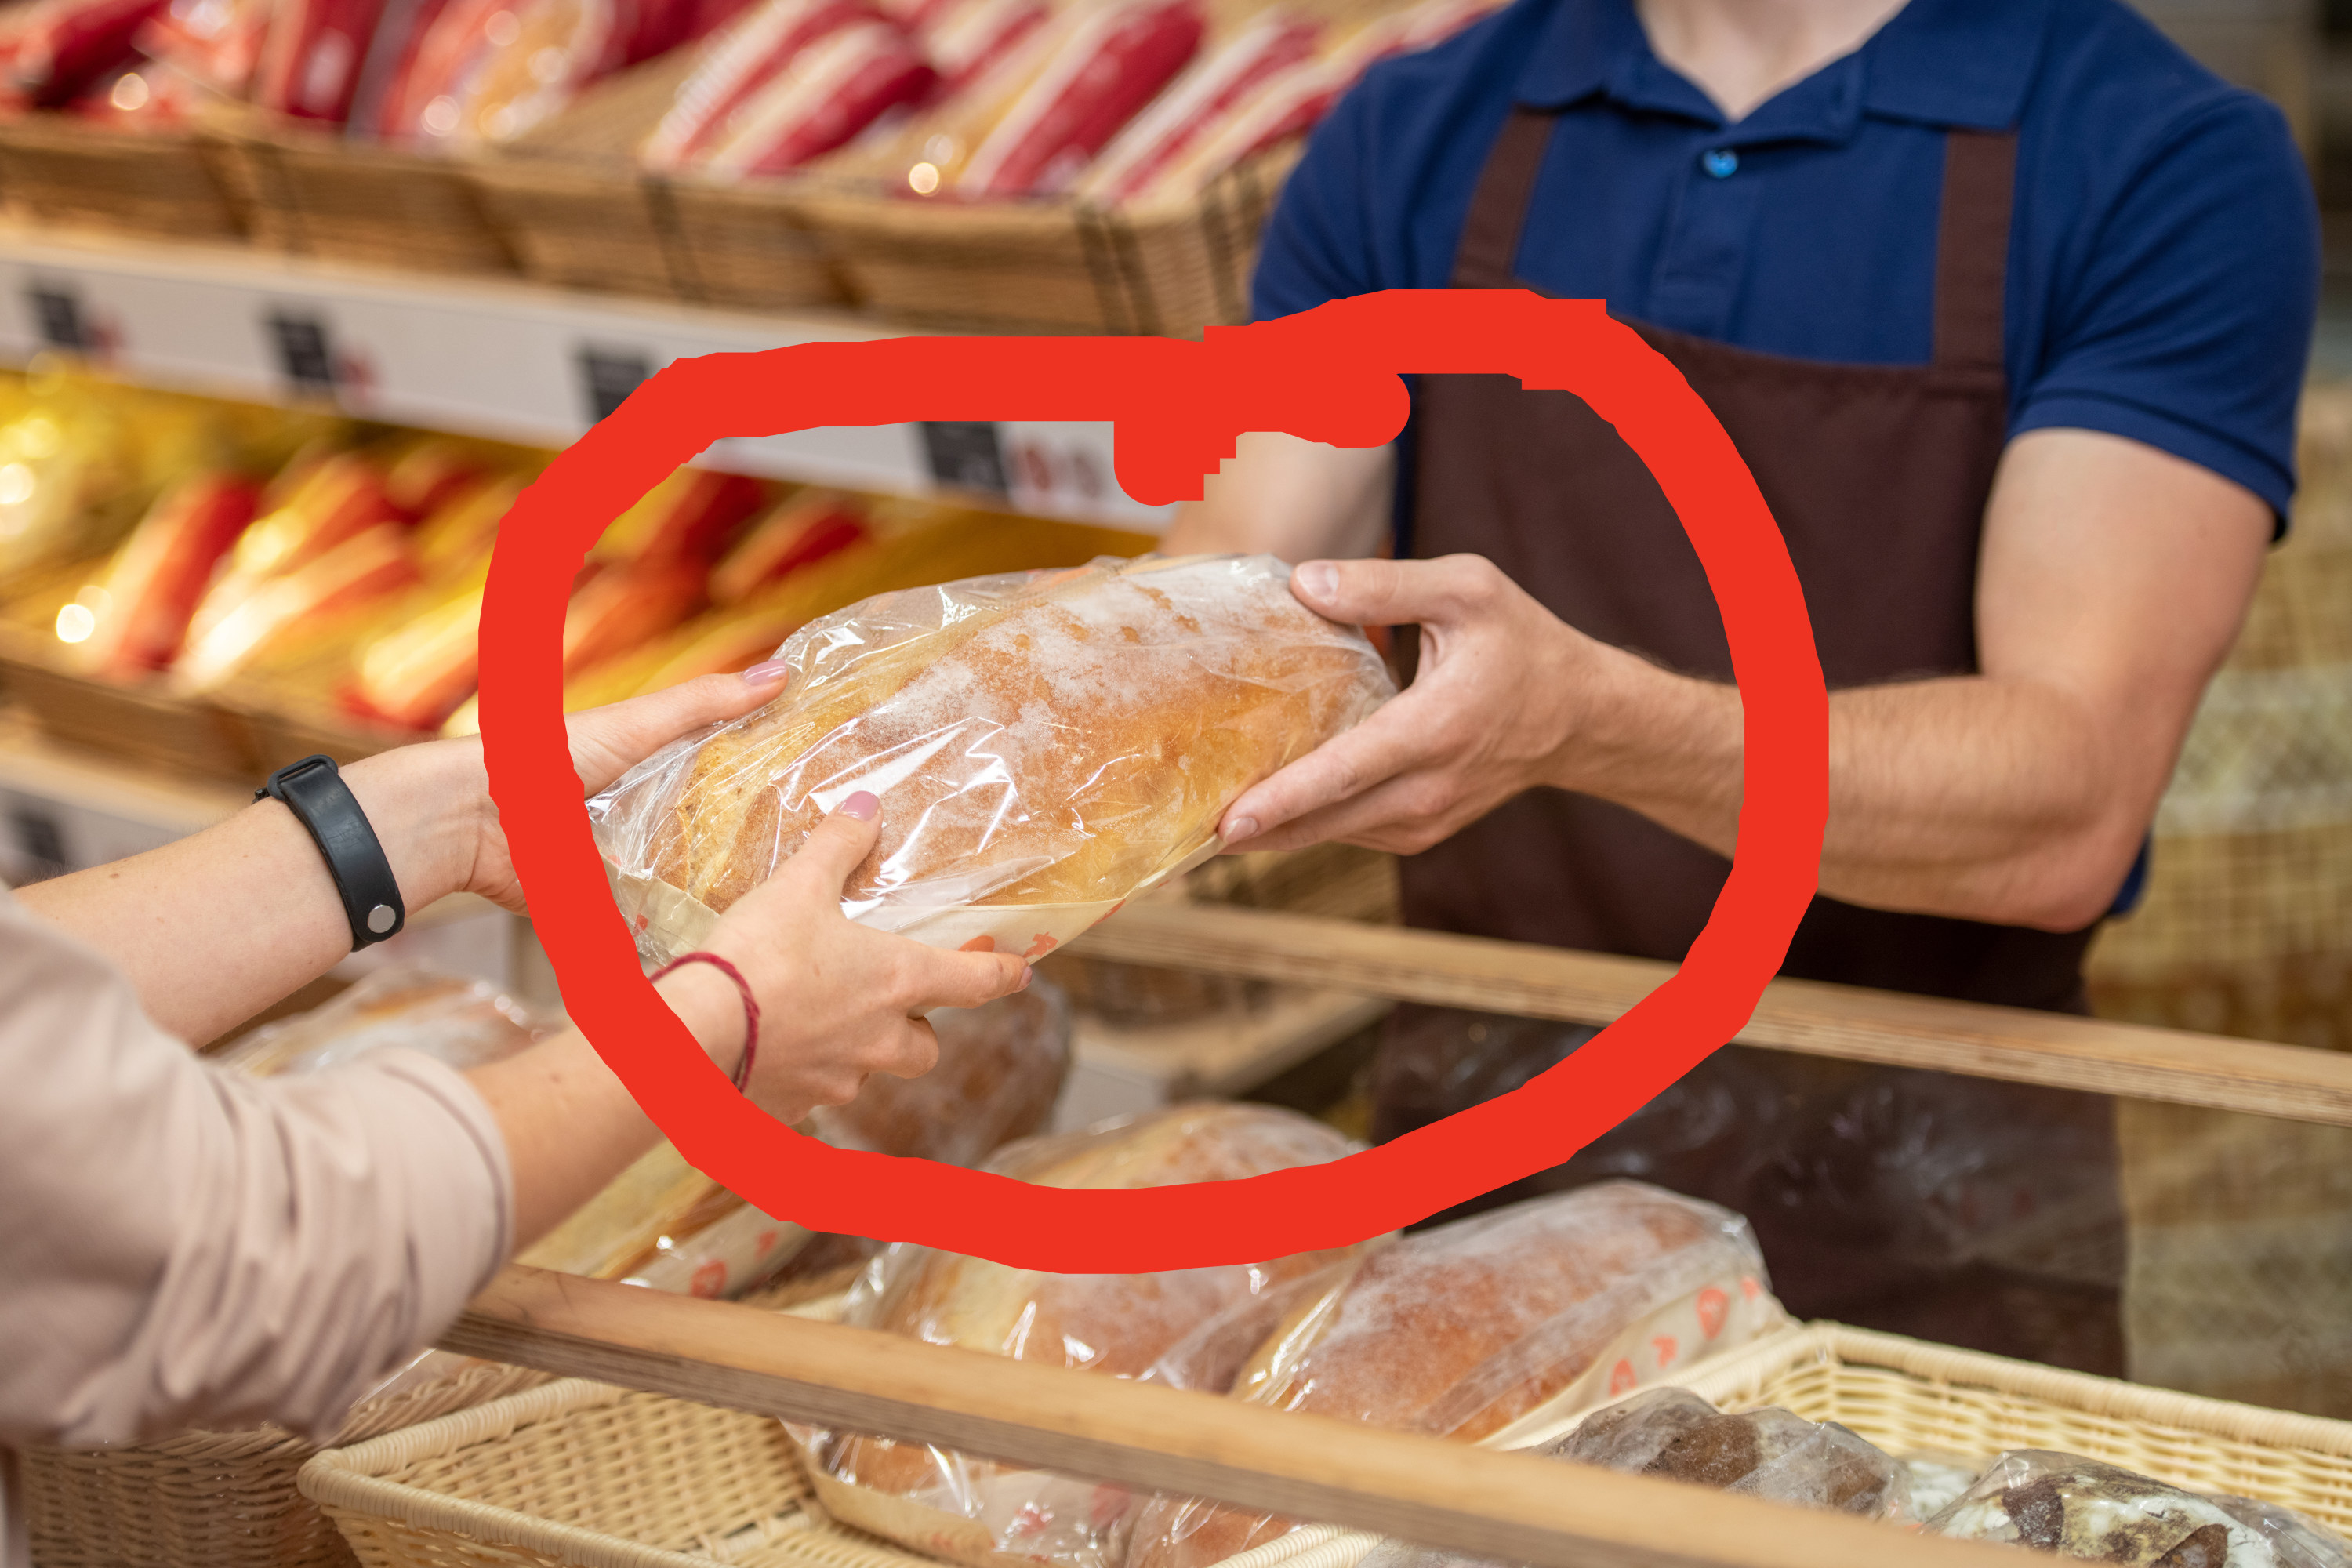 grocery store bakery employee handing a loaf of bread to a customer